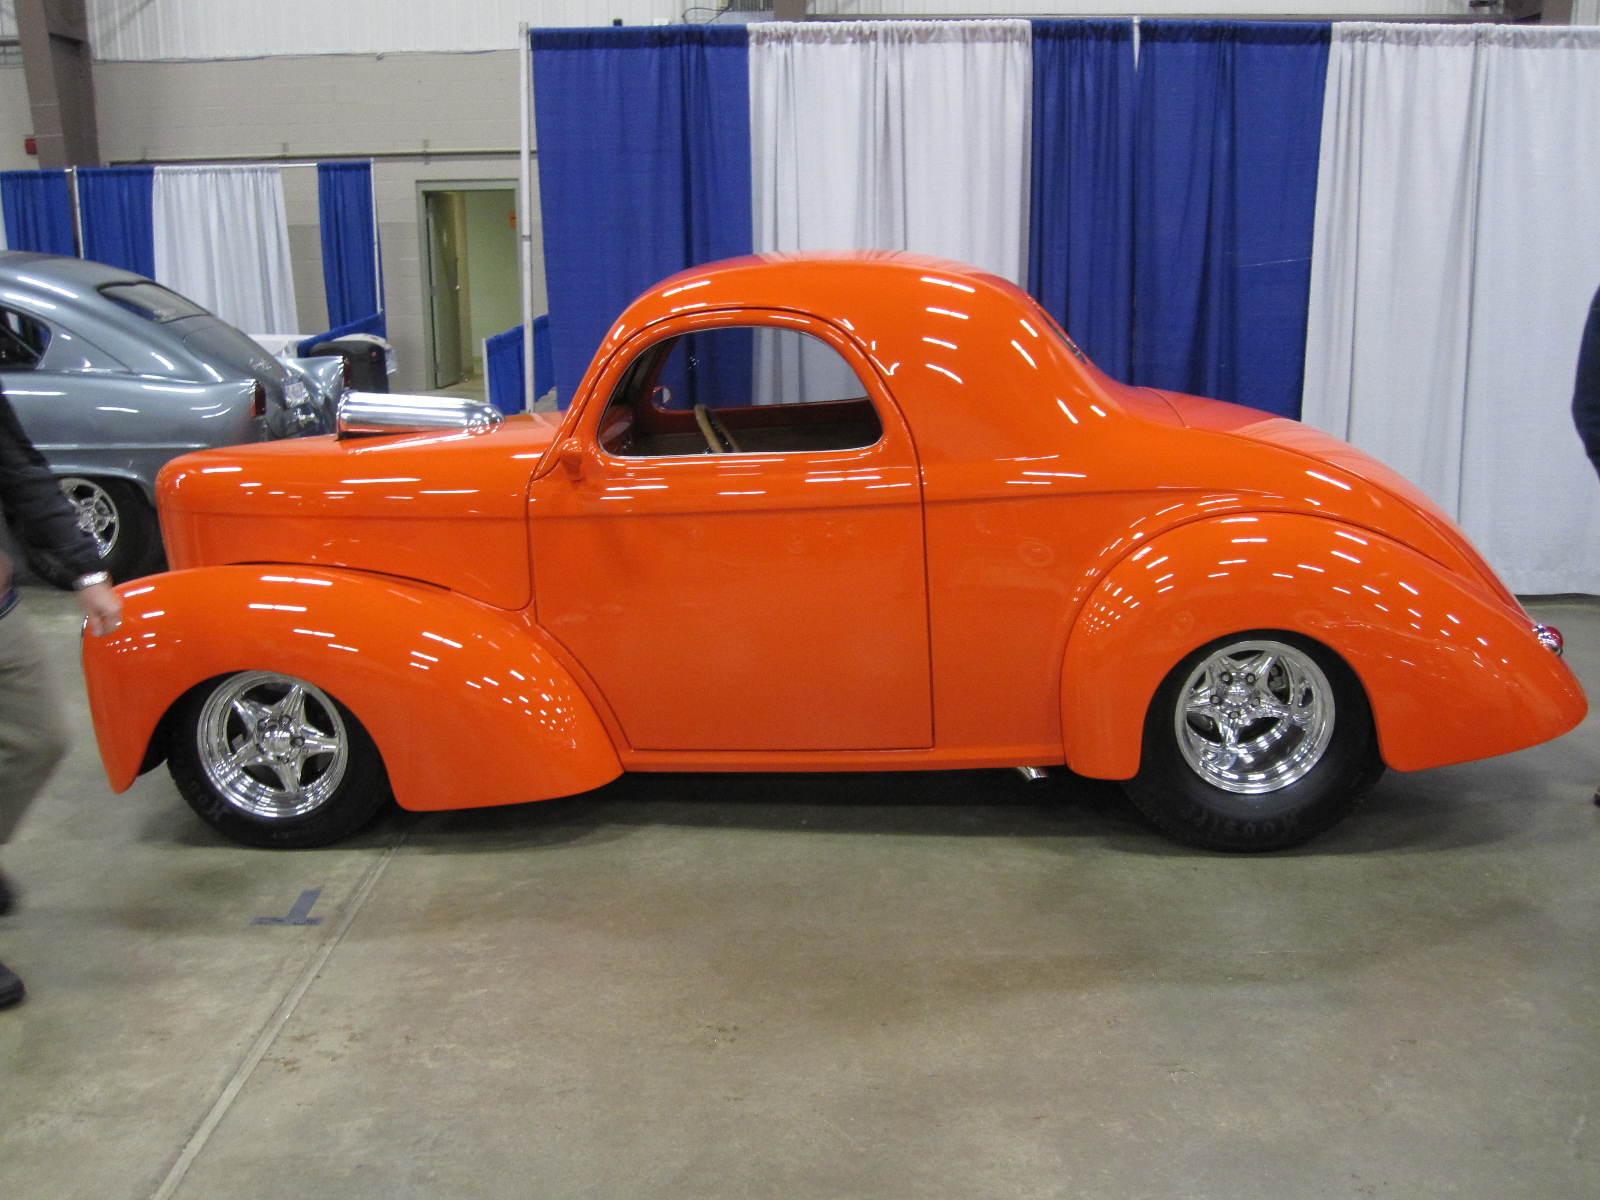 Amazing 1941 Willys Pictures & Backgrounds